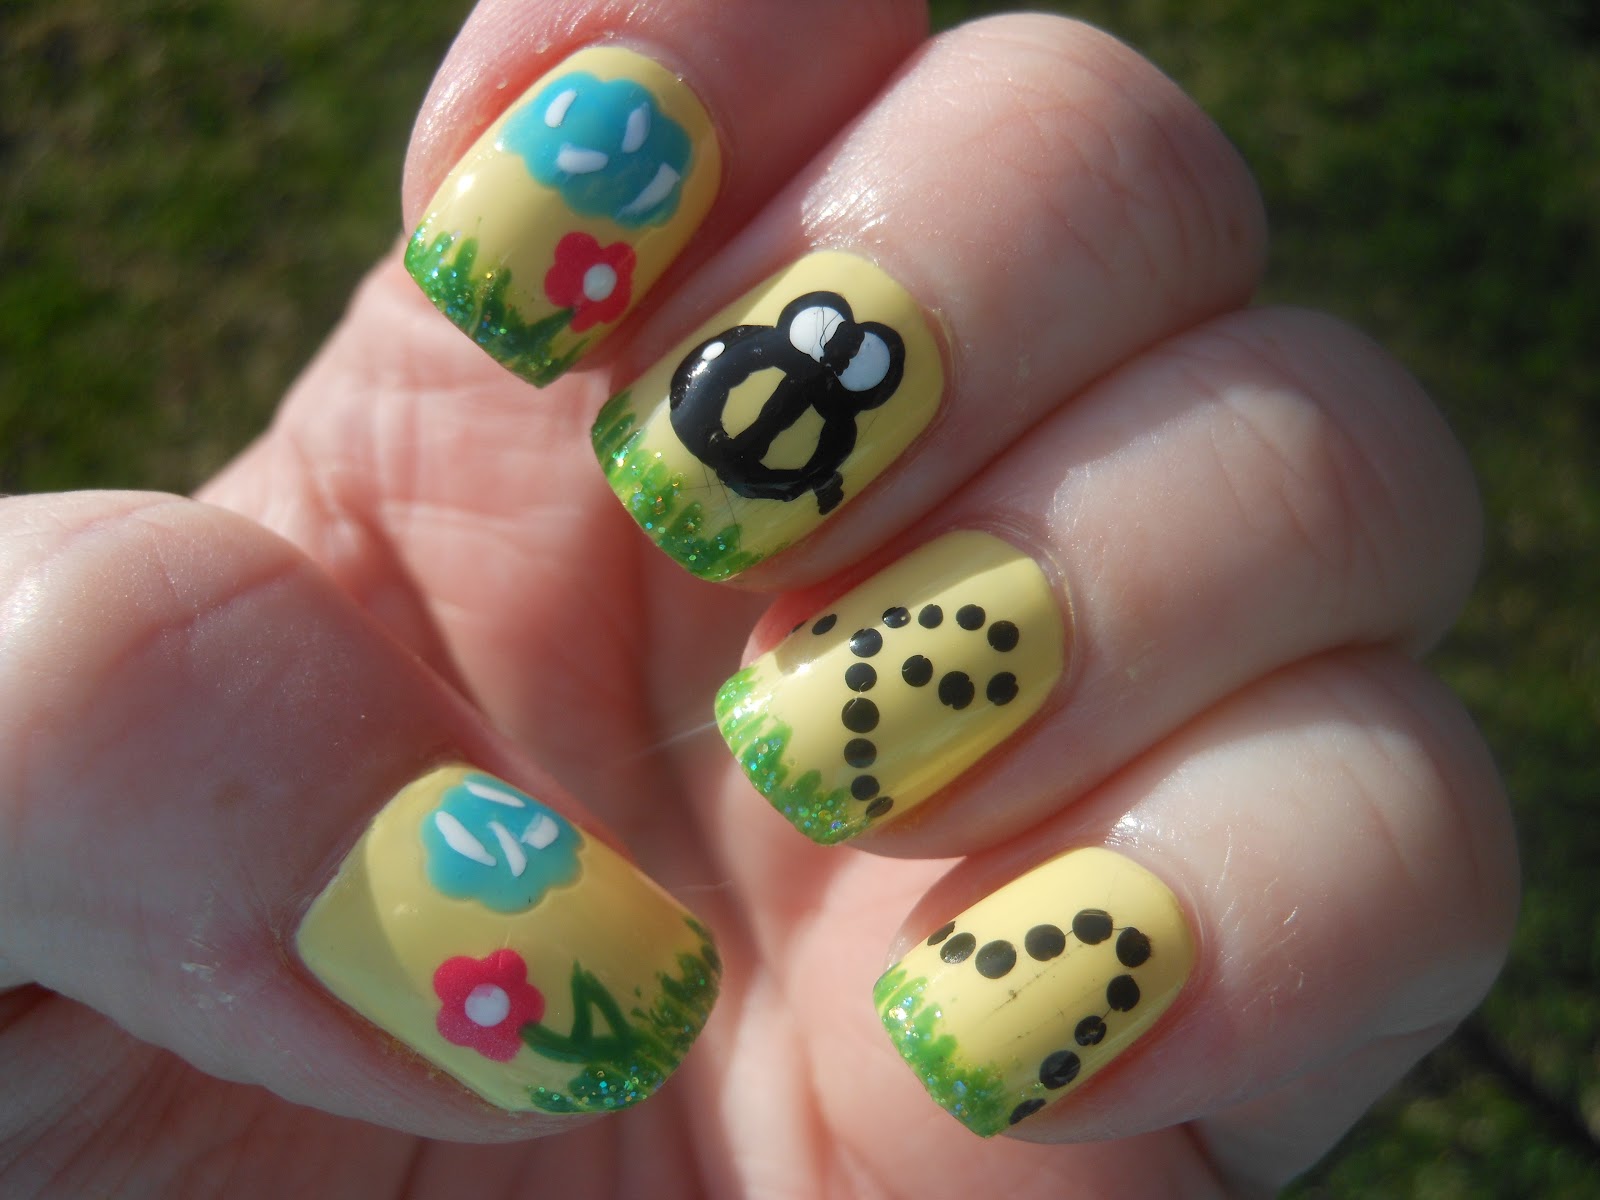 6. "Bumble Bee Nail Art with Dotting Tool" - wide 2